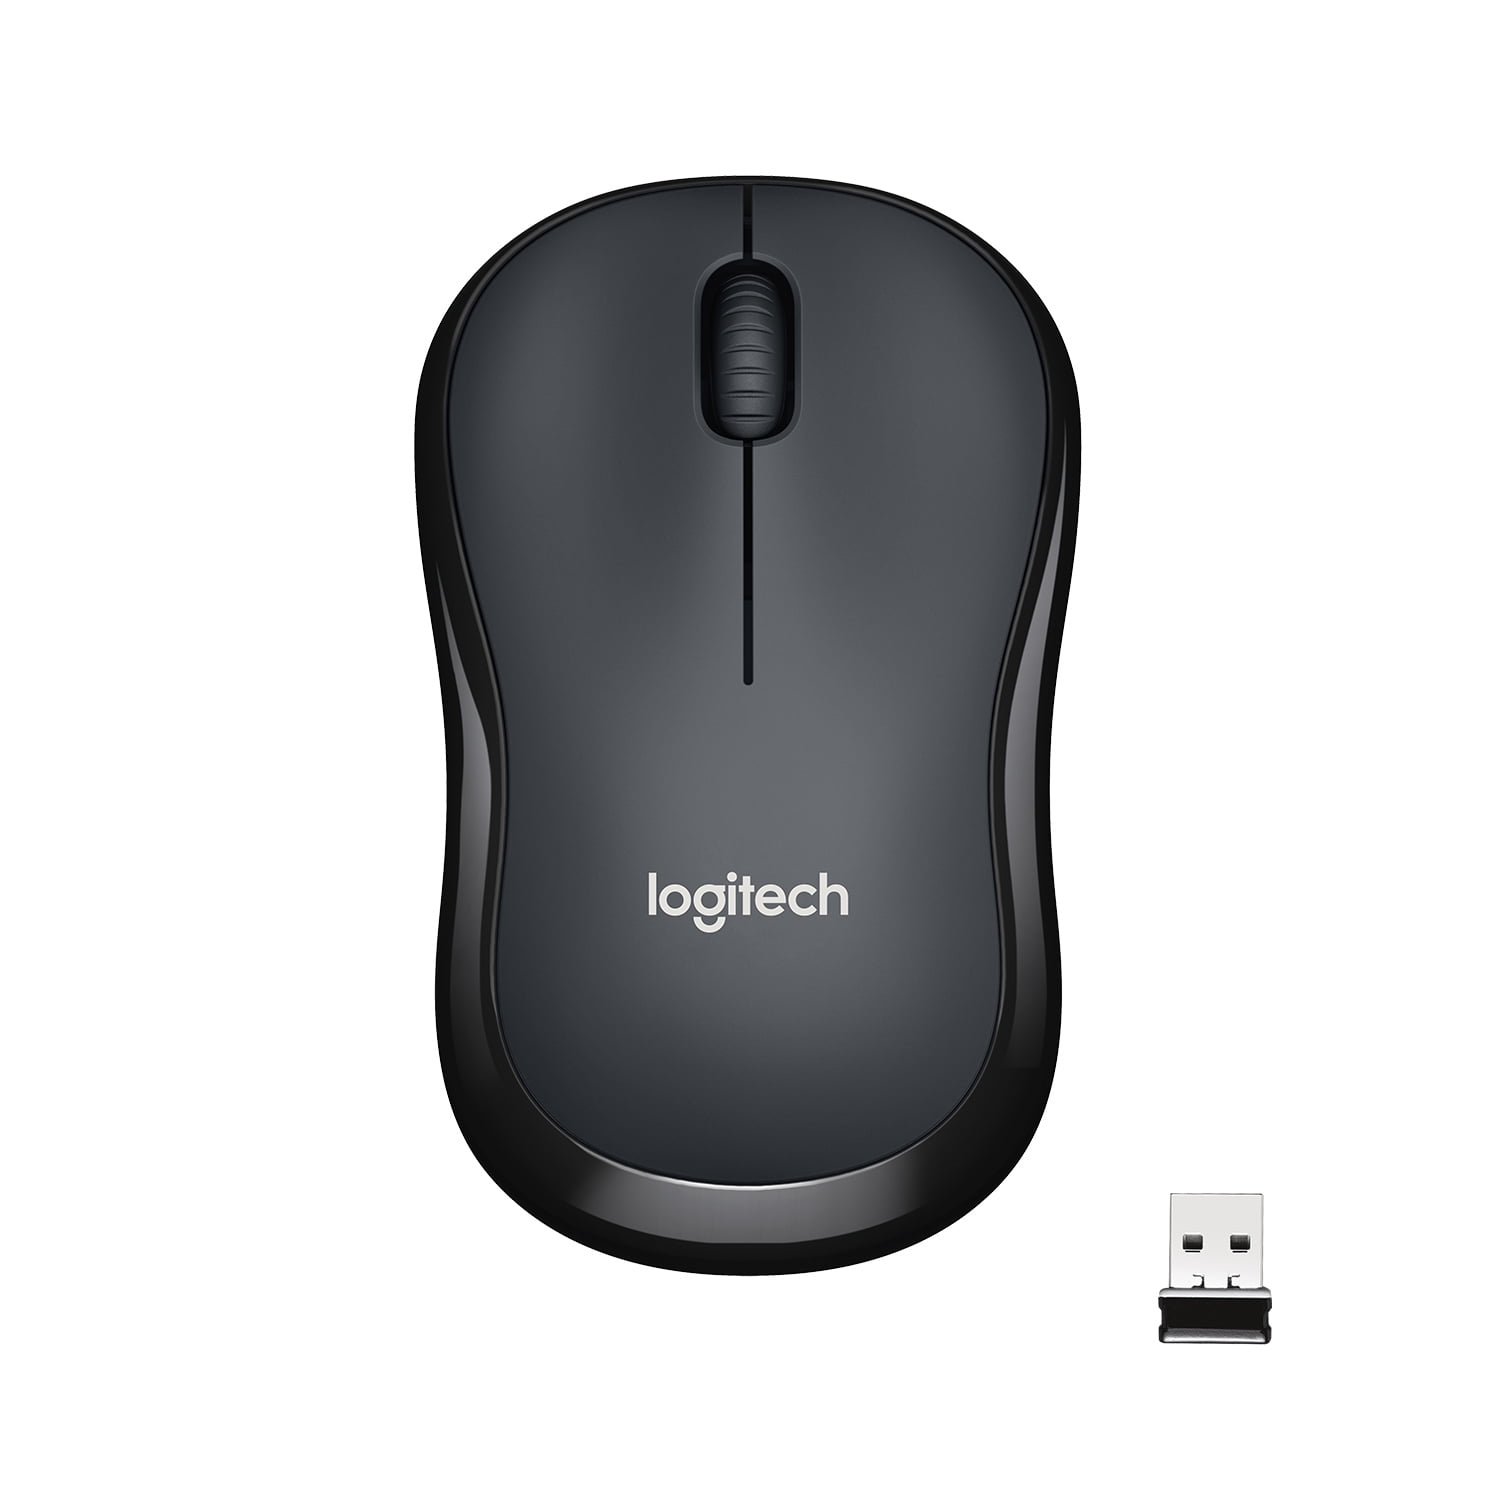 Logitech SILENT Wireless Mouse, 2.4 GHz with USB Receiver, 1000 DPI Optical Tracking, 18-Month Battery, Ambidextrous, Compatible with PC, Mac, Laptop, Black